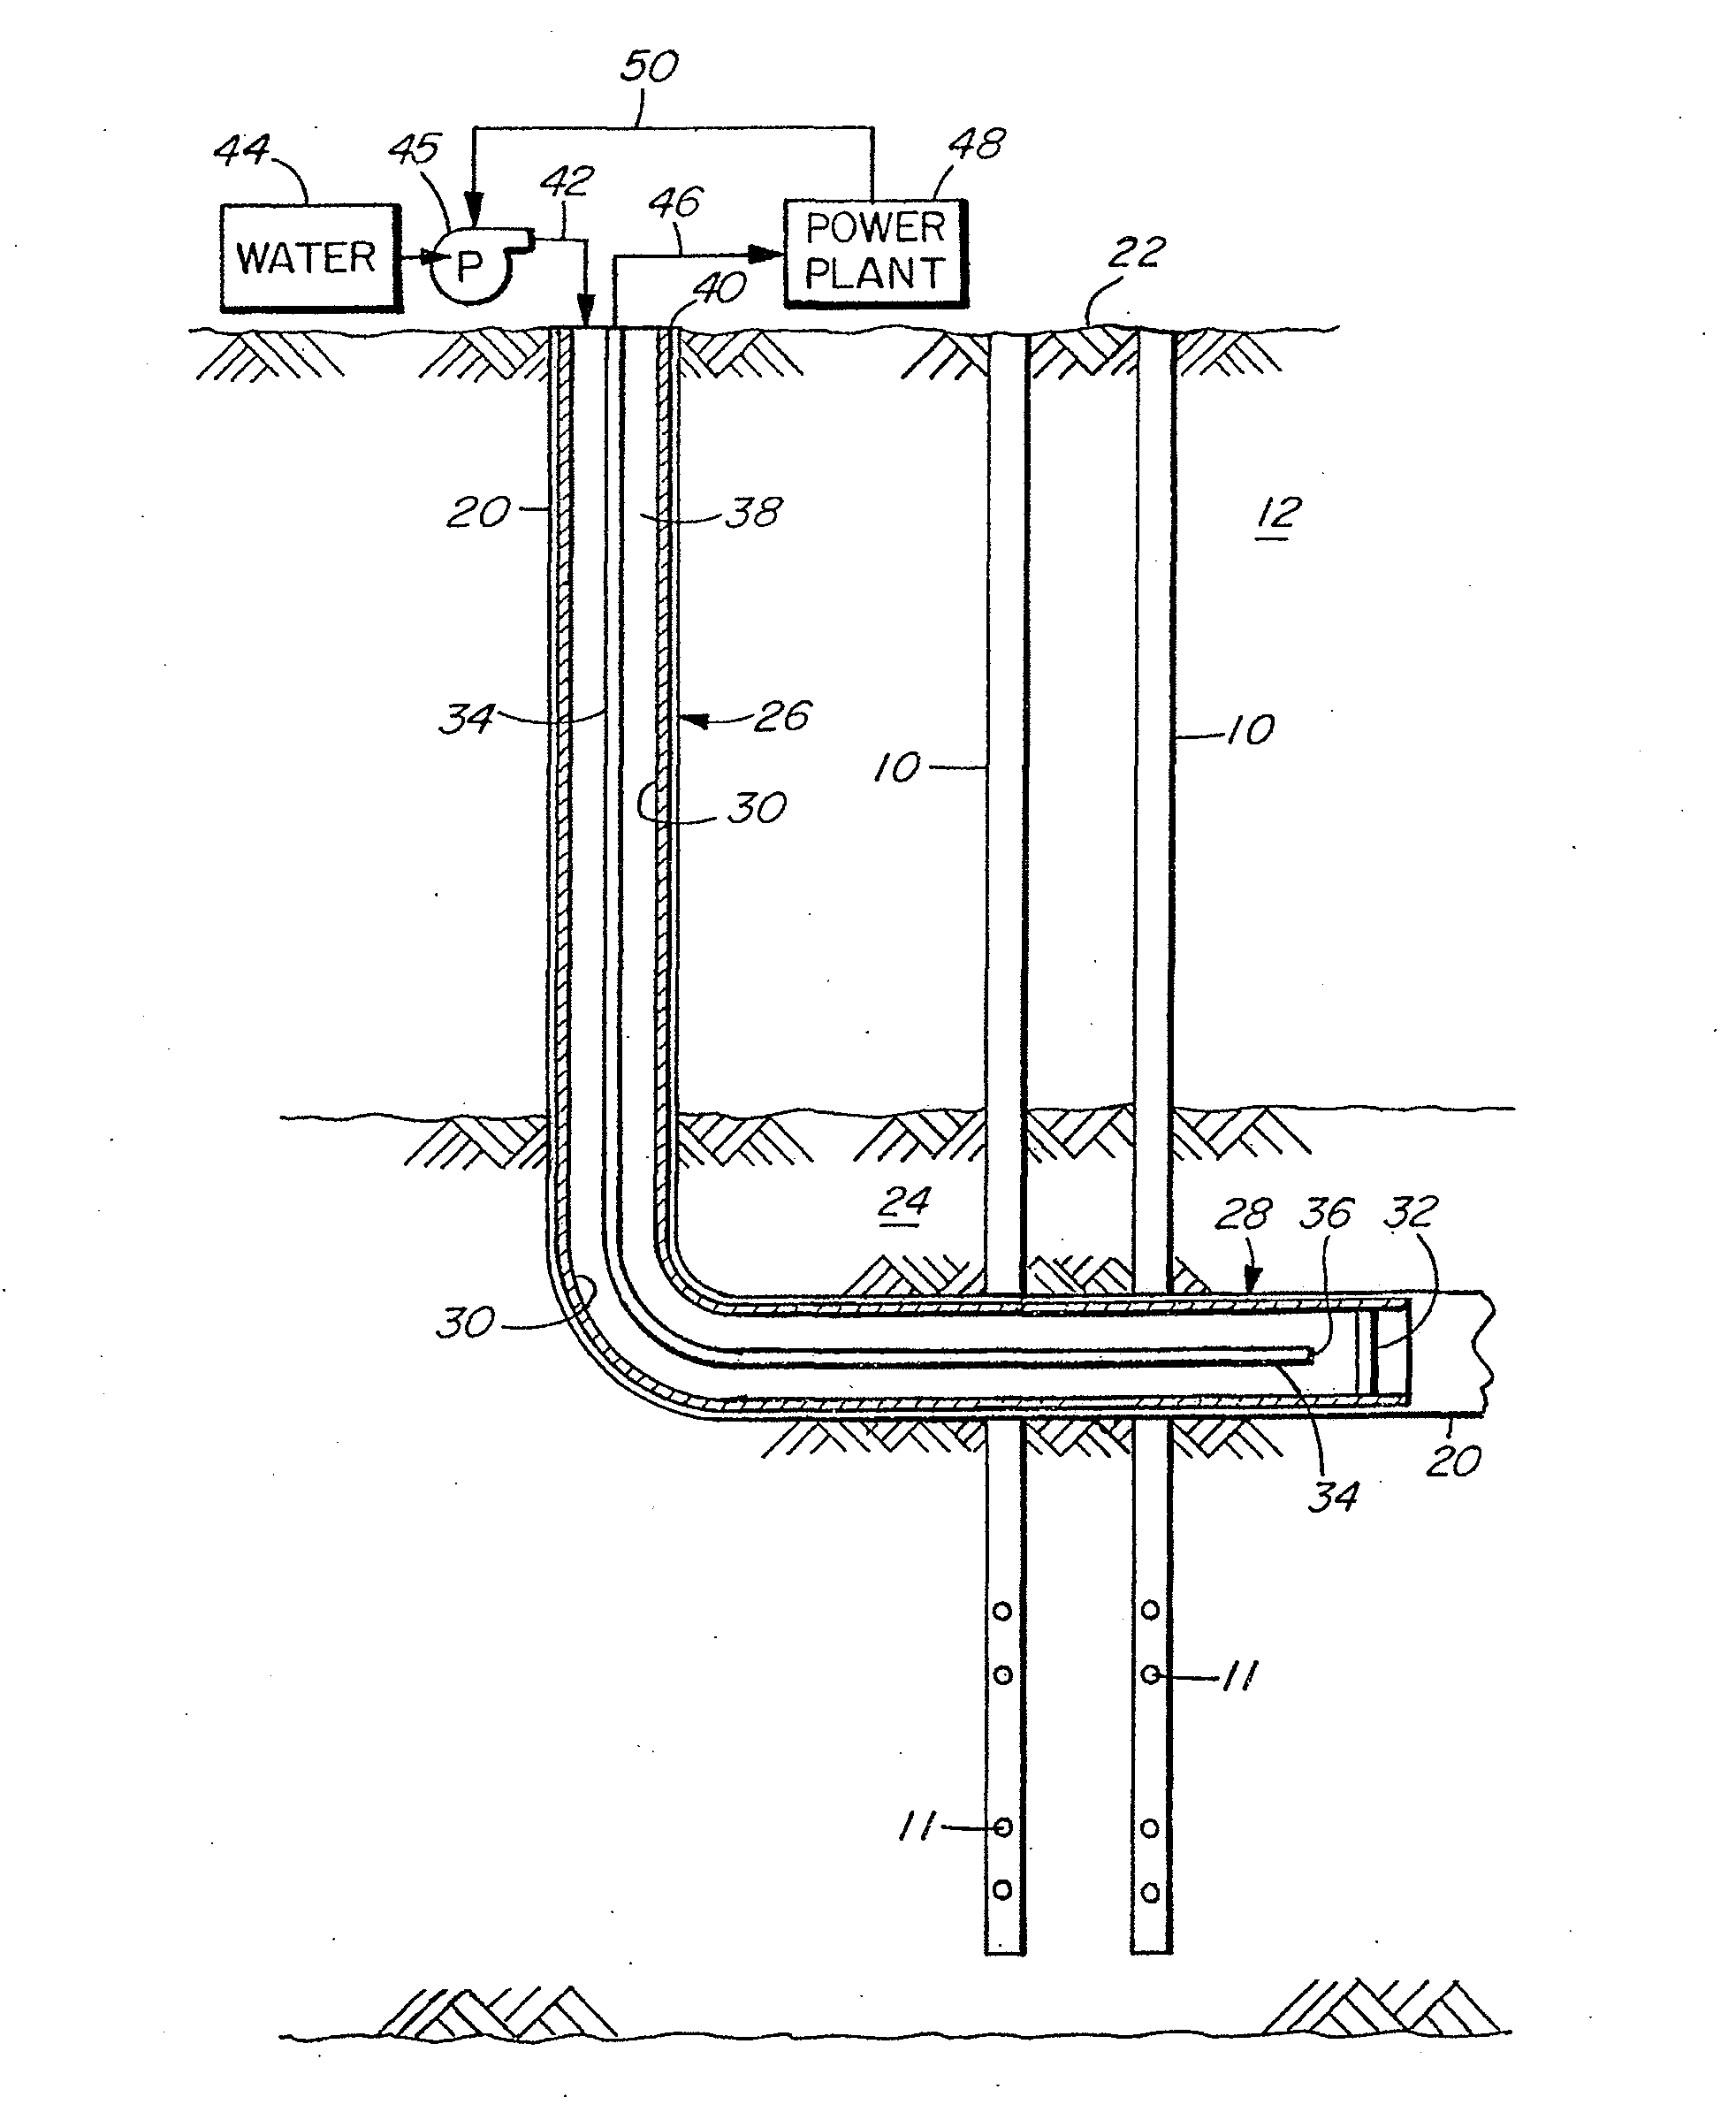 Heat energy extraction system from underground in situ combustion of hydrocarbon reservoirs